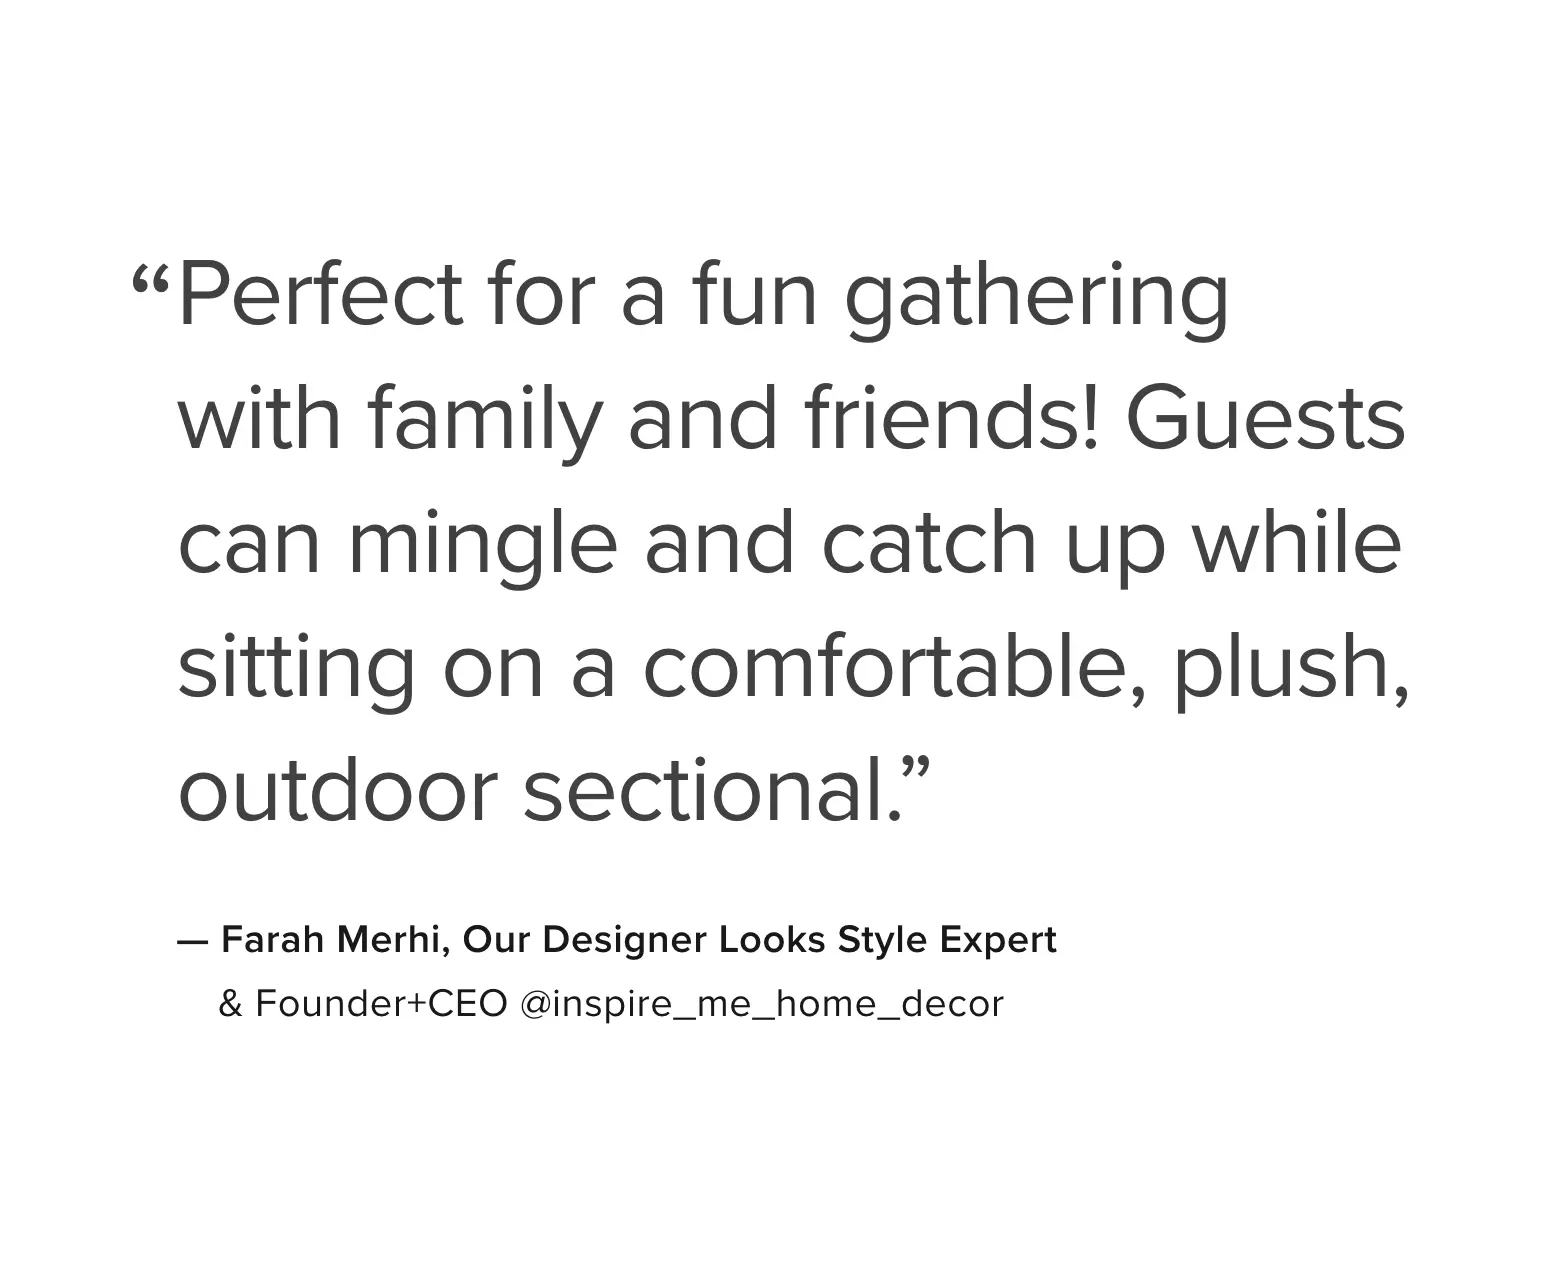 Riverside Collection Quote: Perfect for a fun gathering with family and friends! Guests can mingle and catch up while sitting on a comfortable, plush, outdoor sectional. ~ Farah Merhi, Our Designer Looks Style Expert - Founder and CEO @inspire_me_home_decor (Instagram)